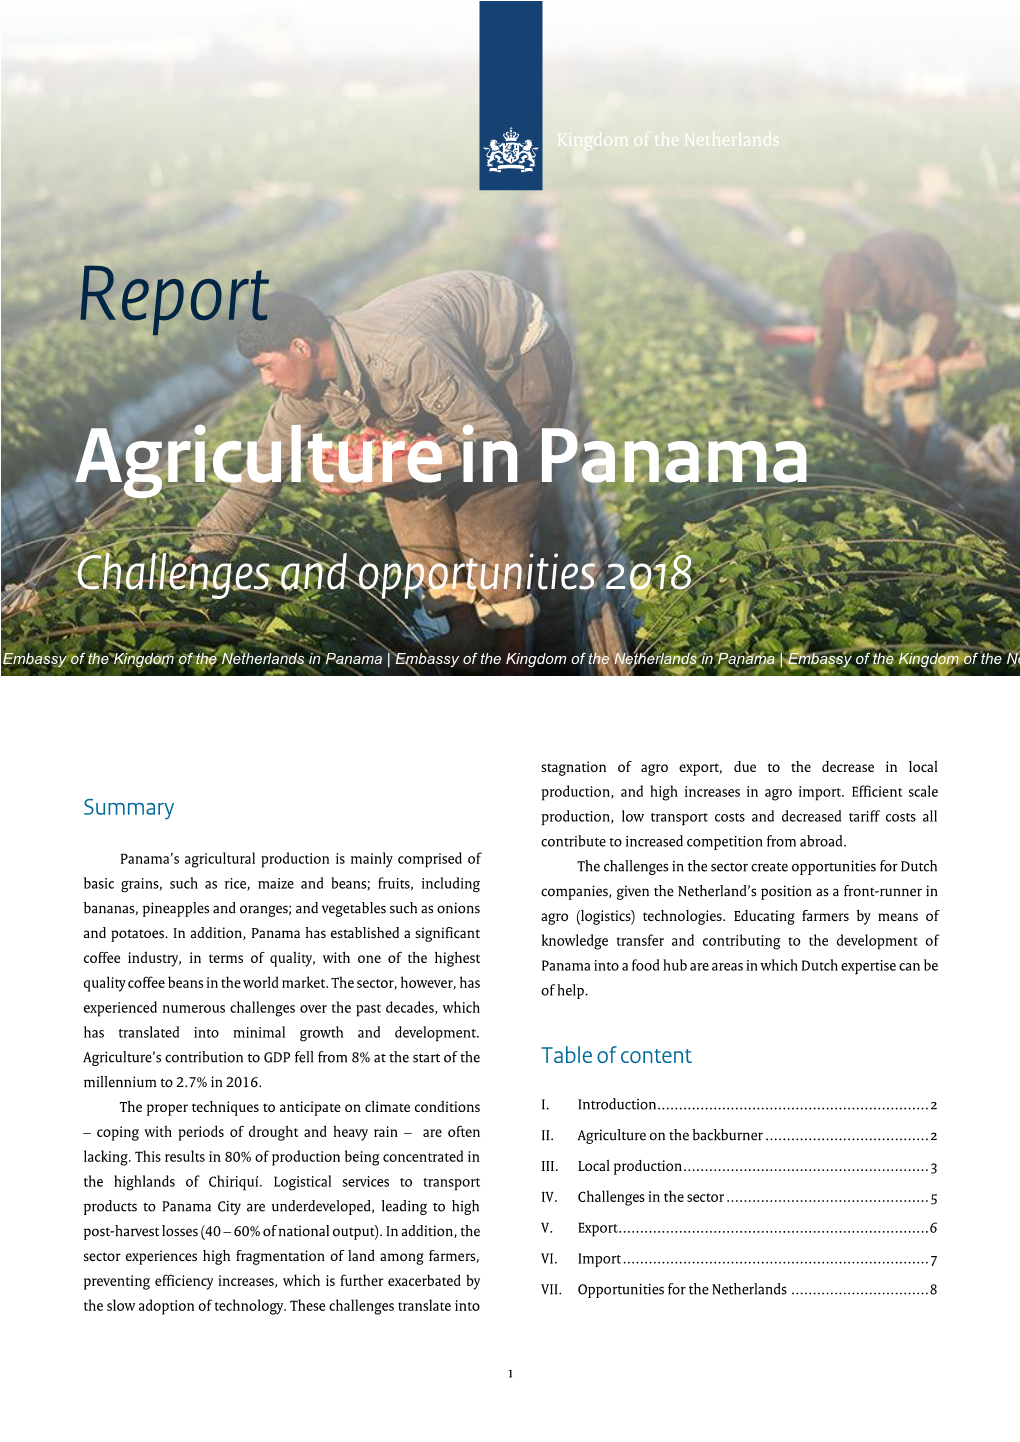 Report Agriculture in Panama